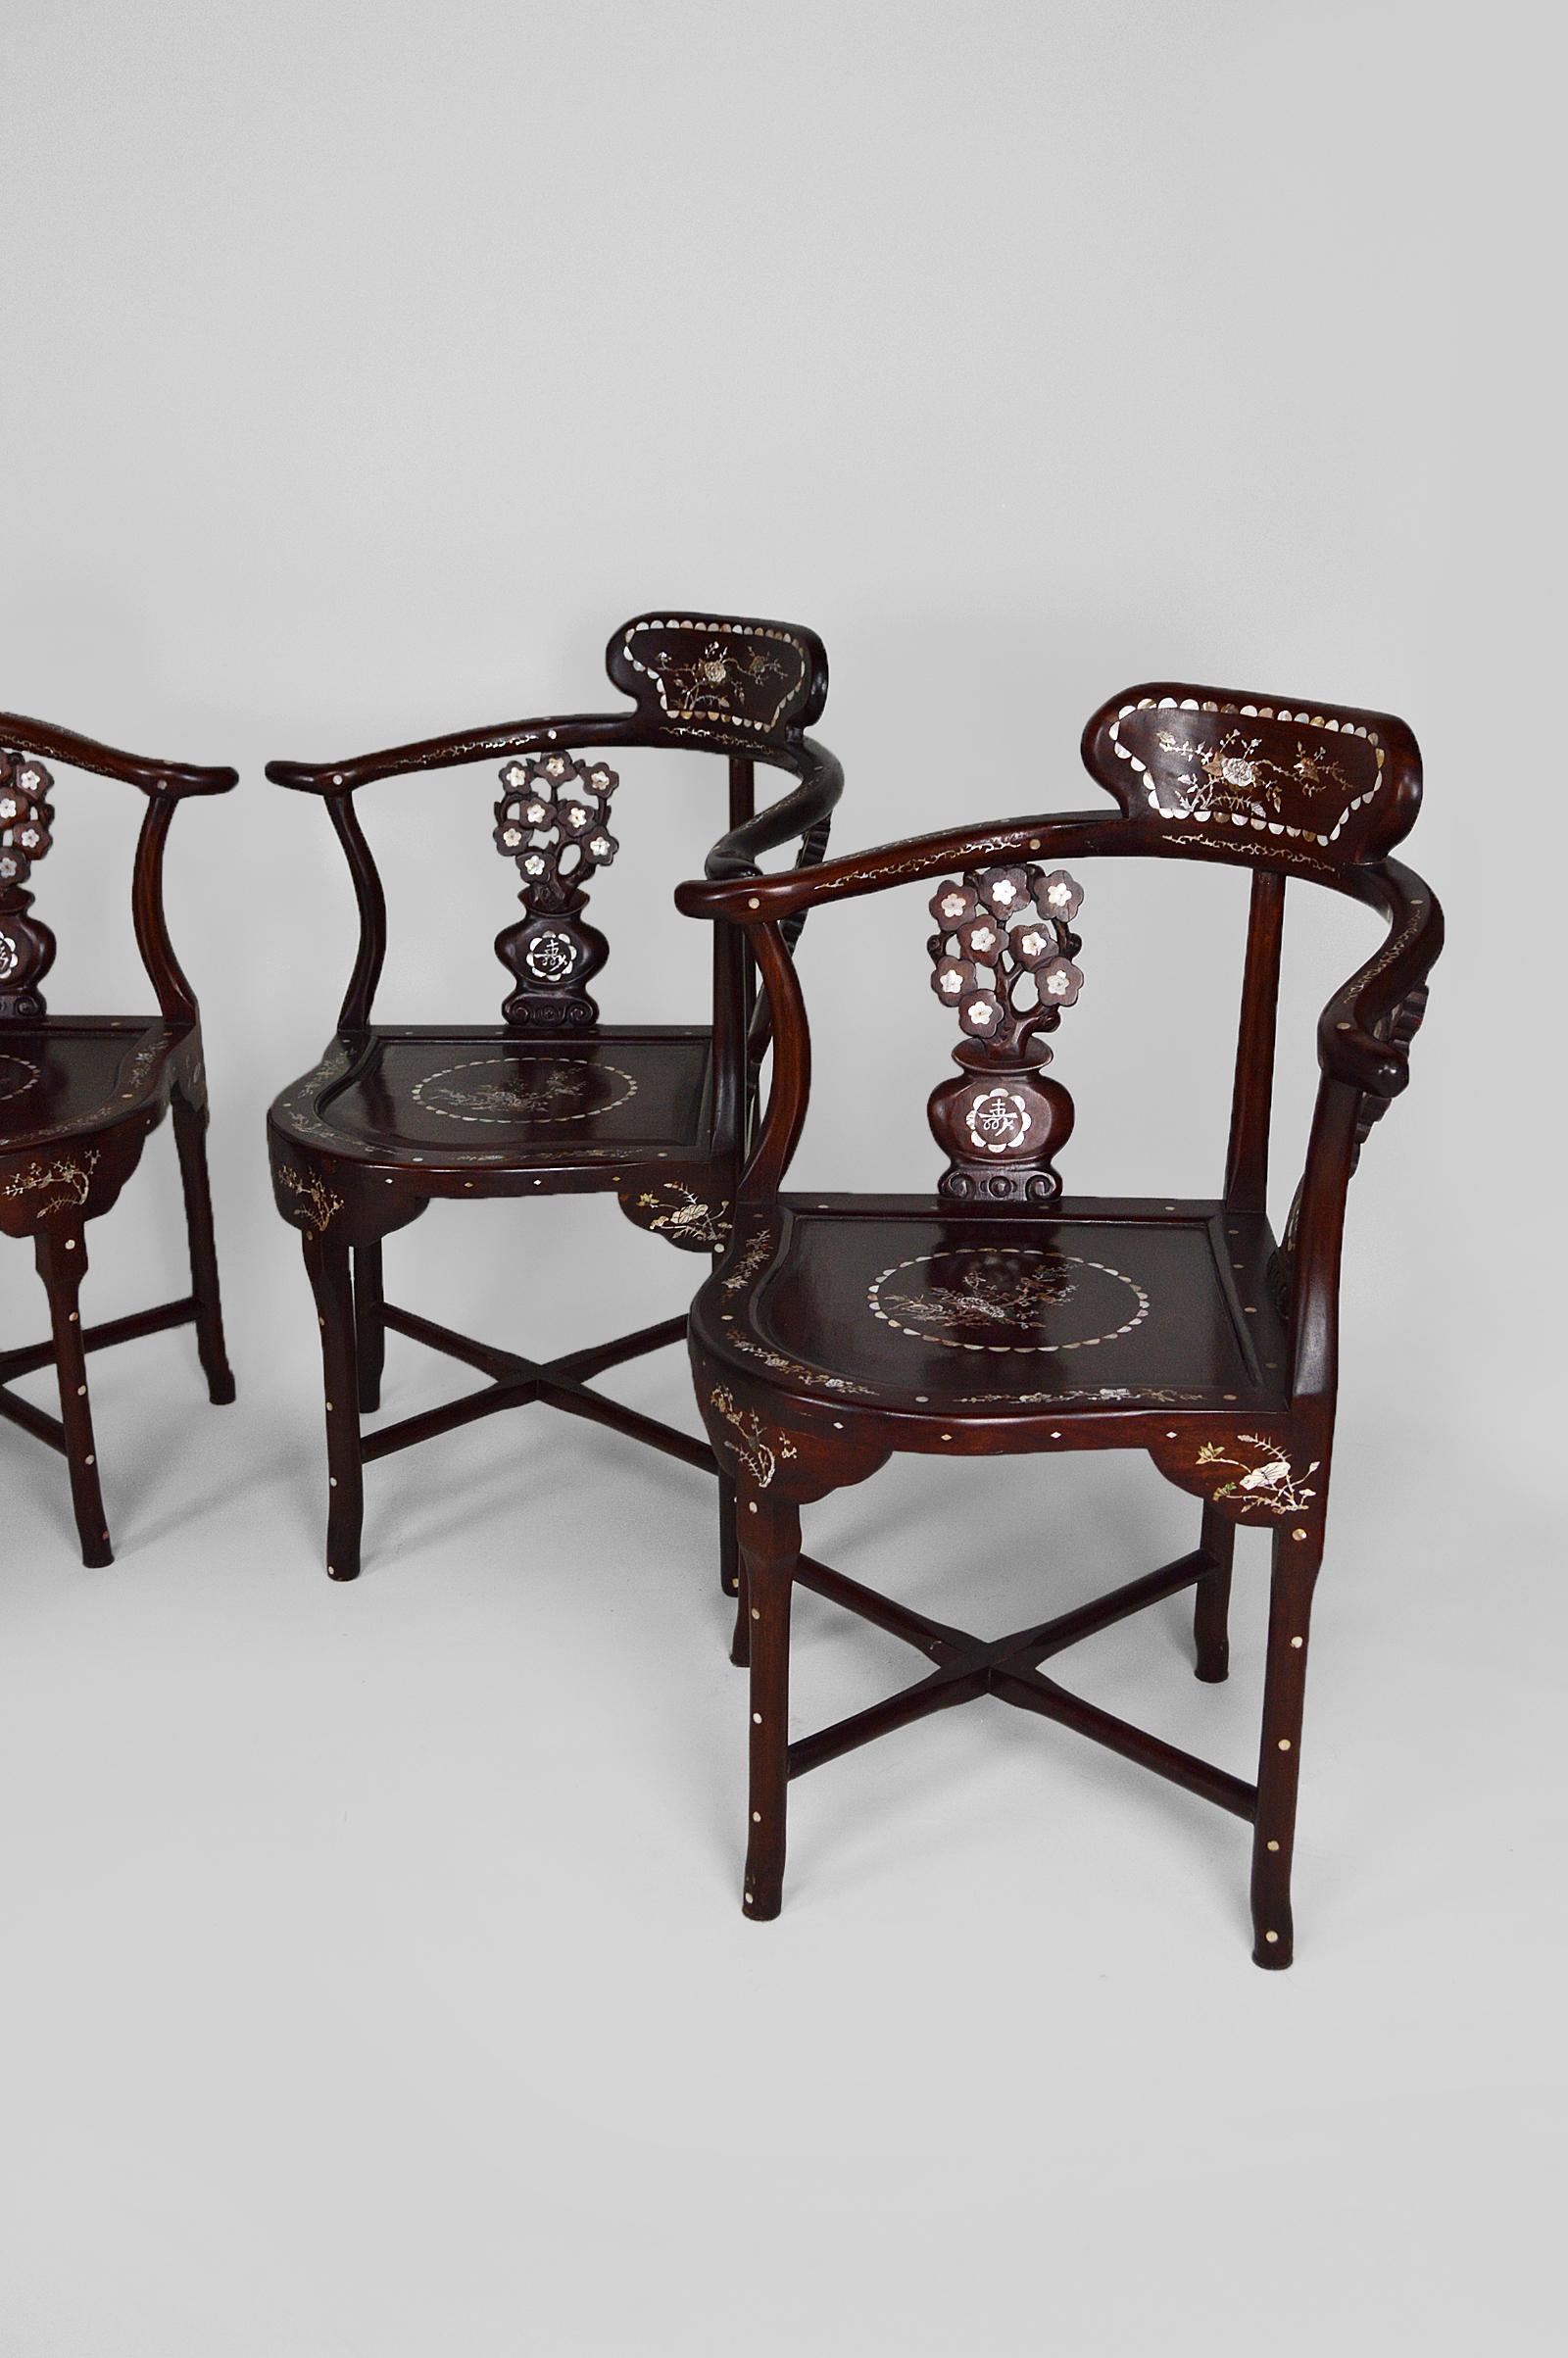 Chinese Export Set of 4 Asian Armchairs in Carved and Inlaid Wood, circa 1900-1920 For Sale